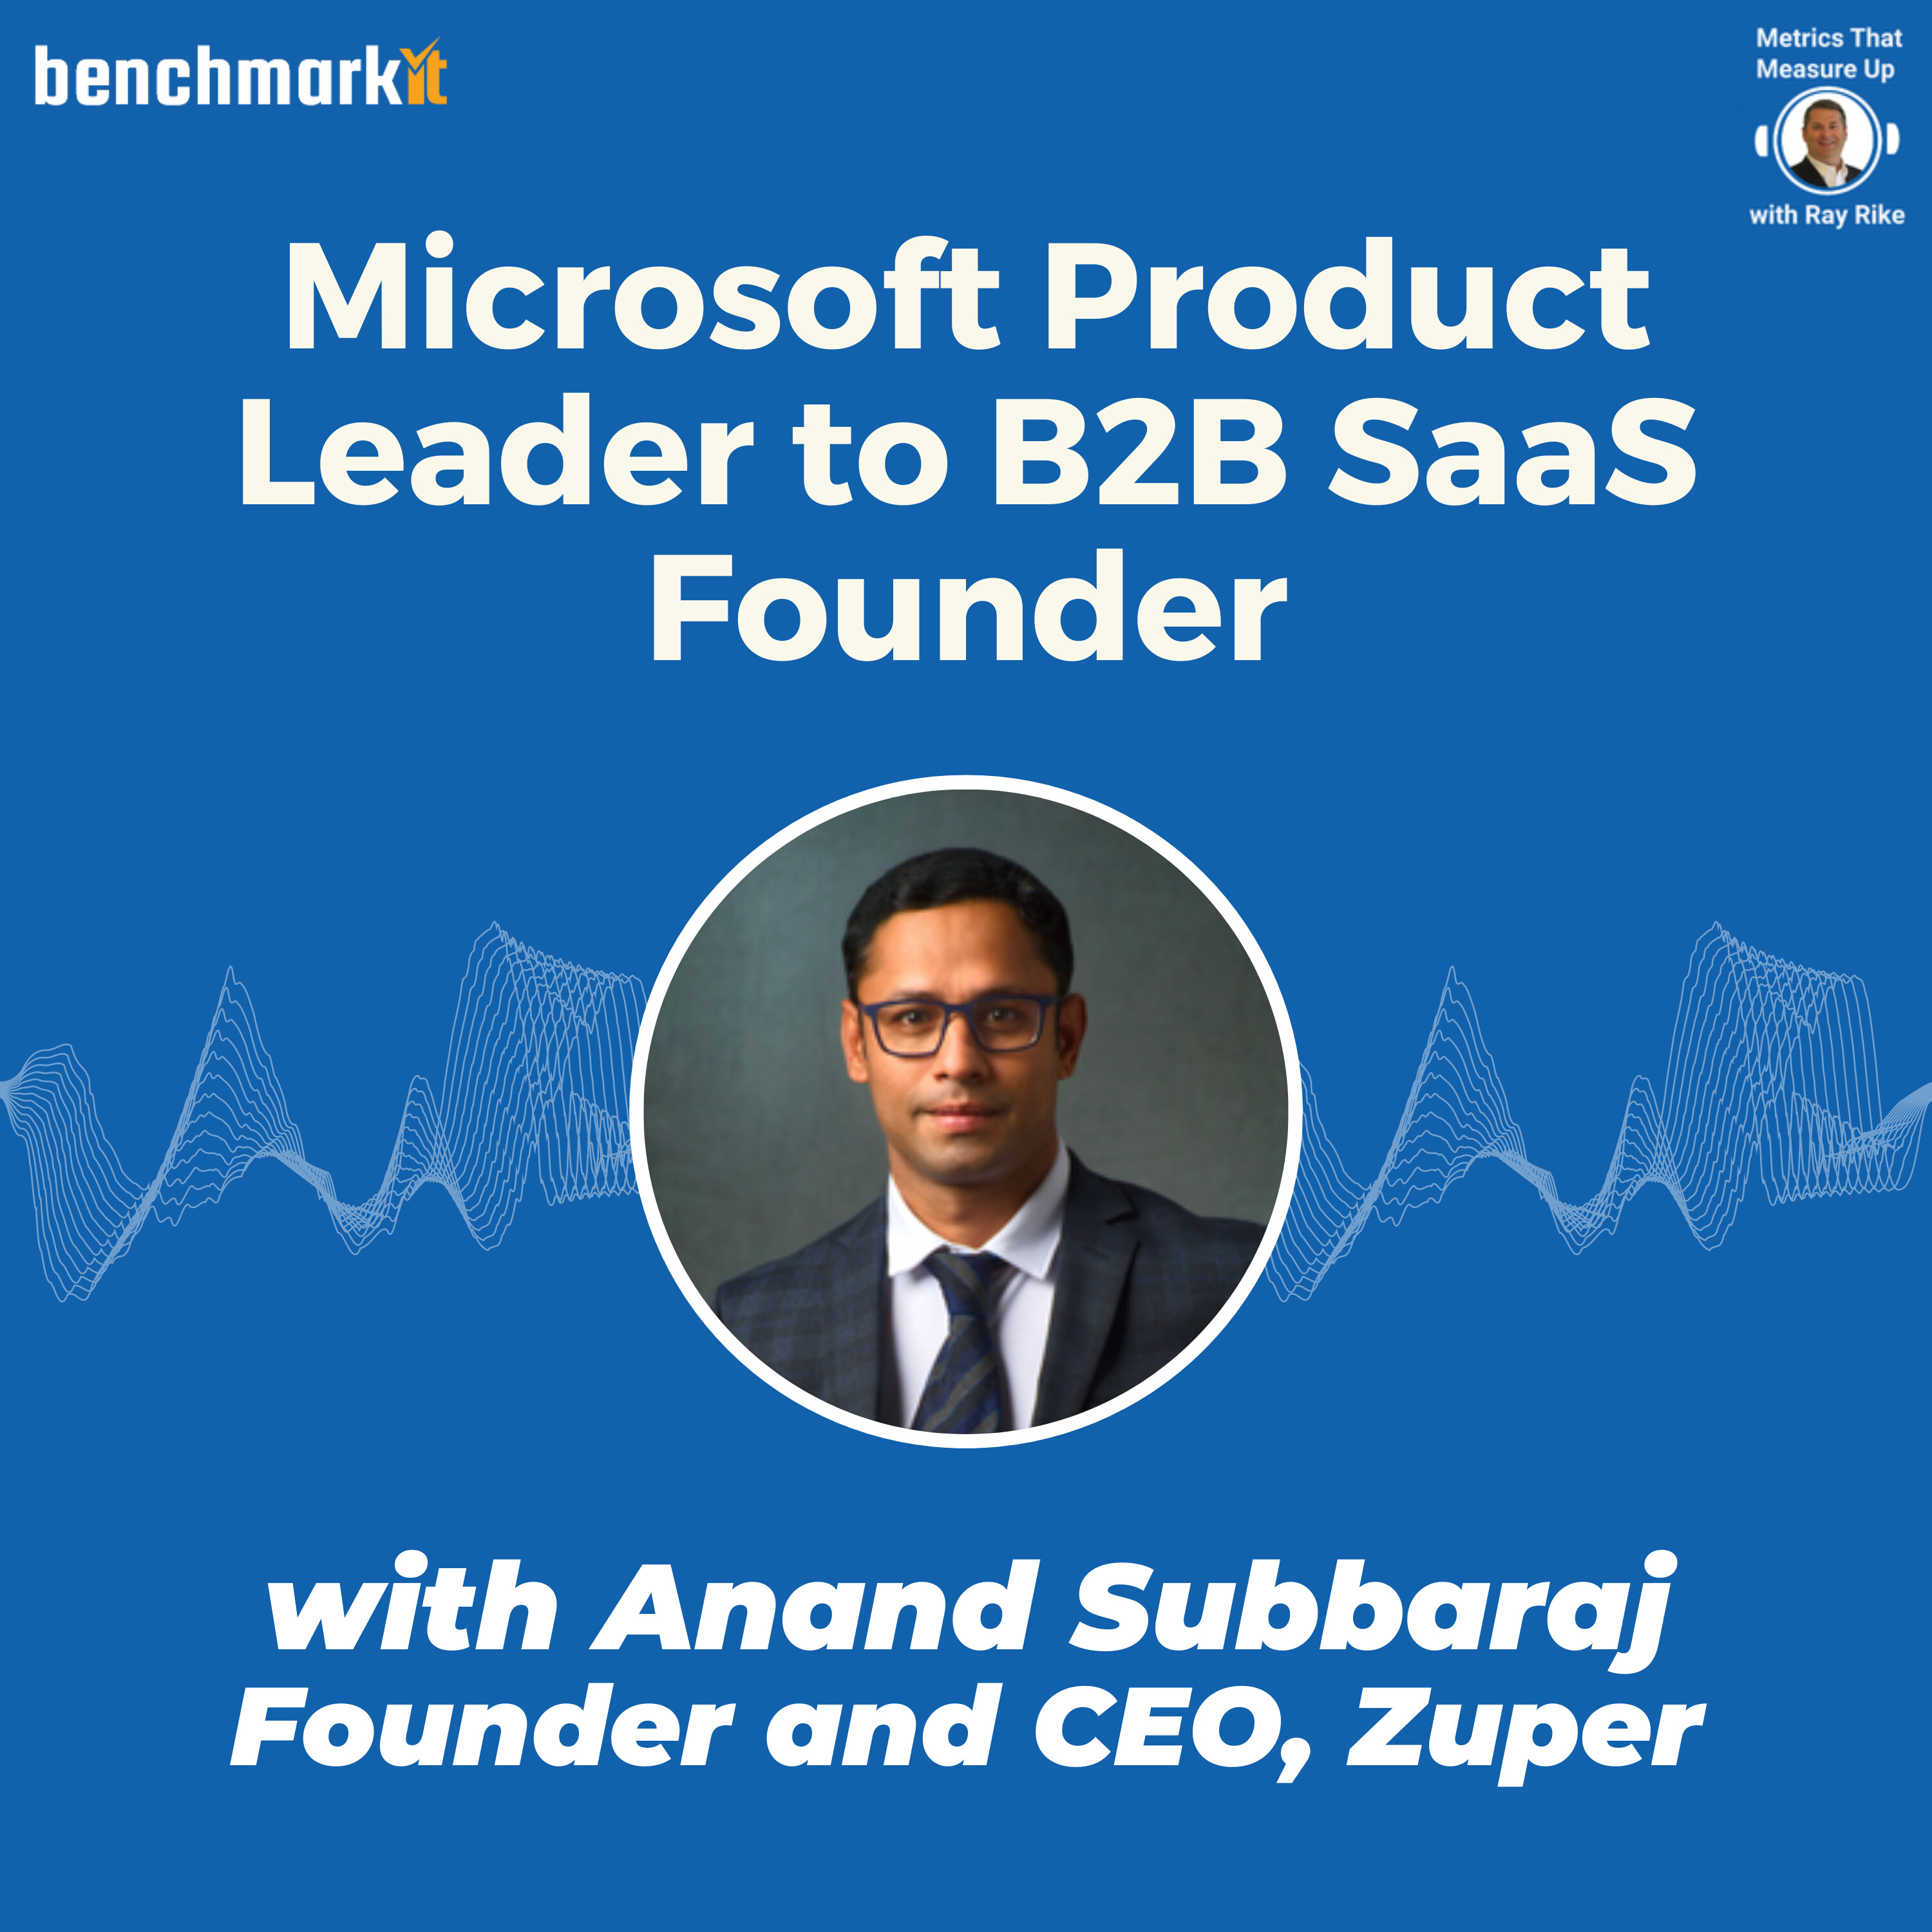 Microsoft Product Leader to SaaS Founder - with Anand Subbaraj, Founder and CEO Zuper